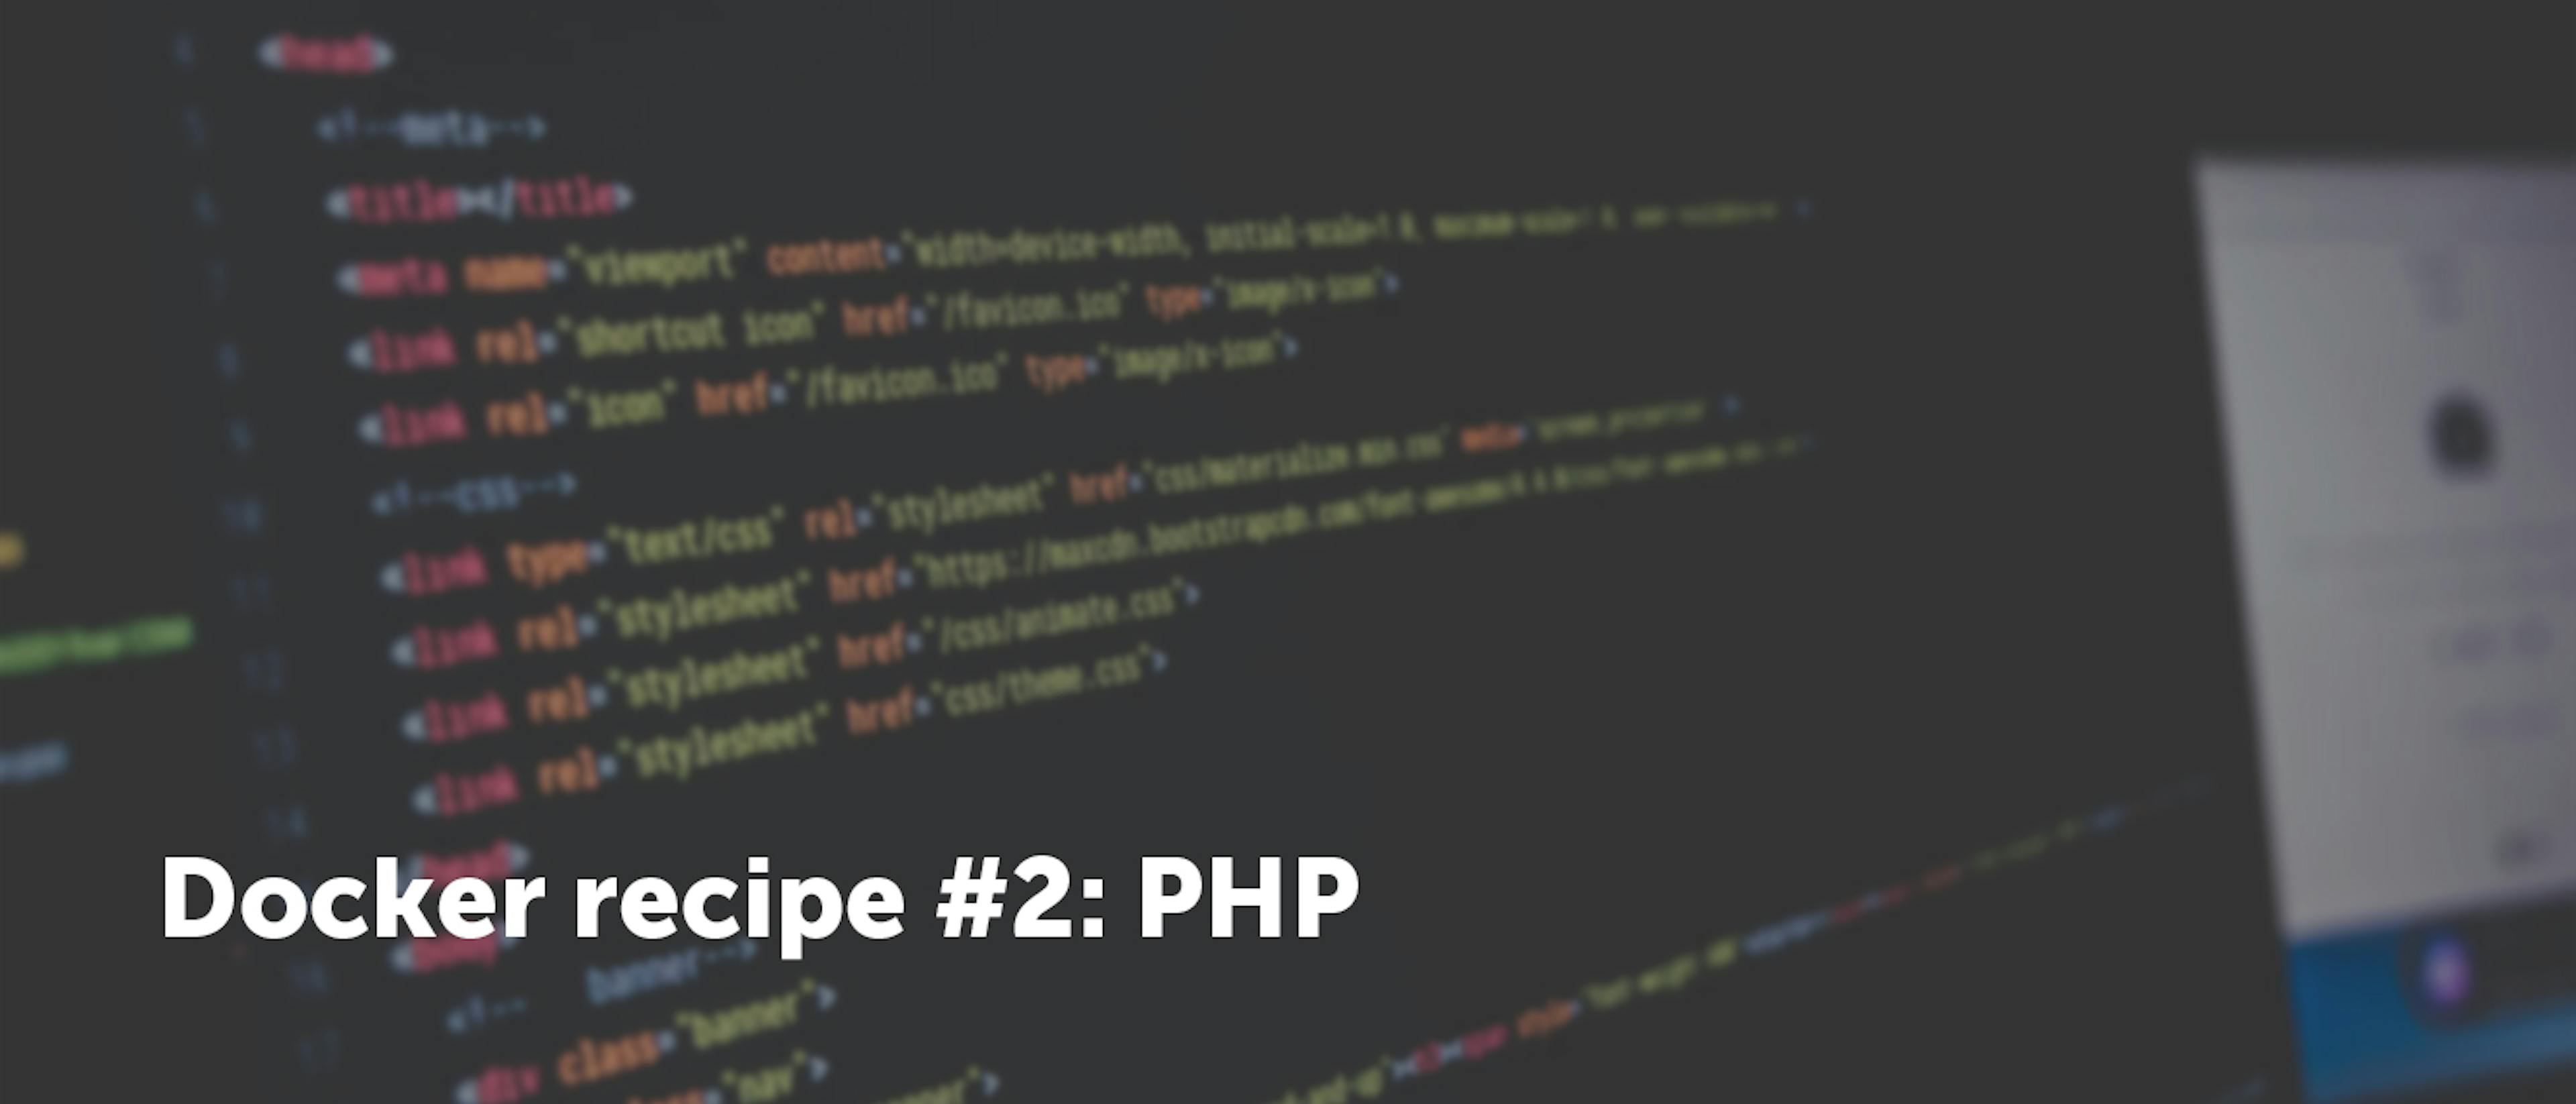 /nginx-php-docker-how-to-get-php-page-up-with-local-domain-name-ho3x33f6 feature image